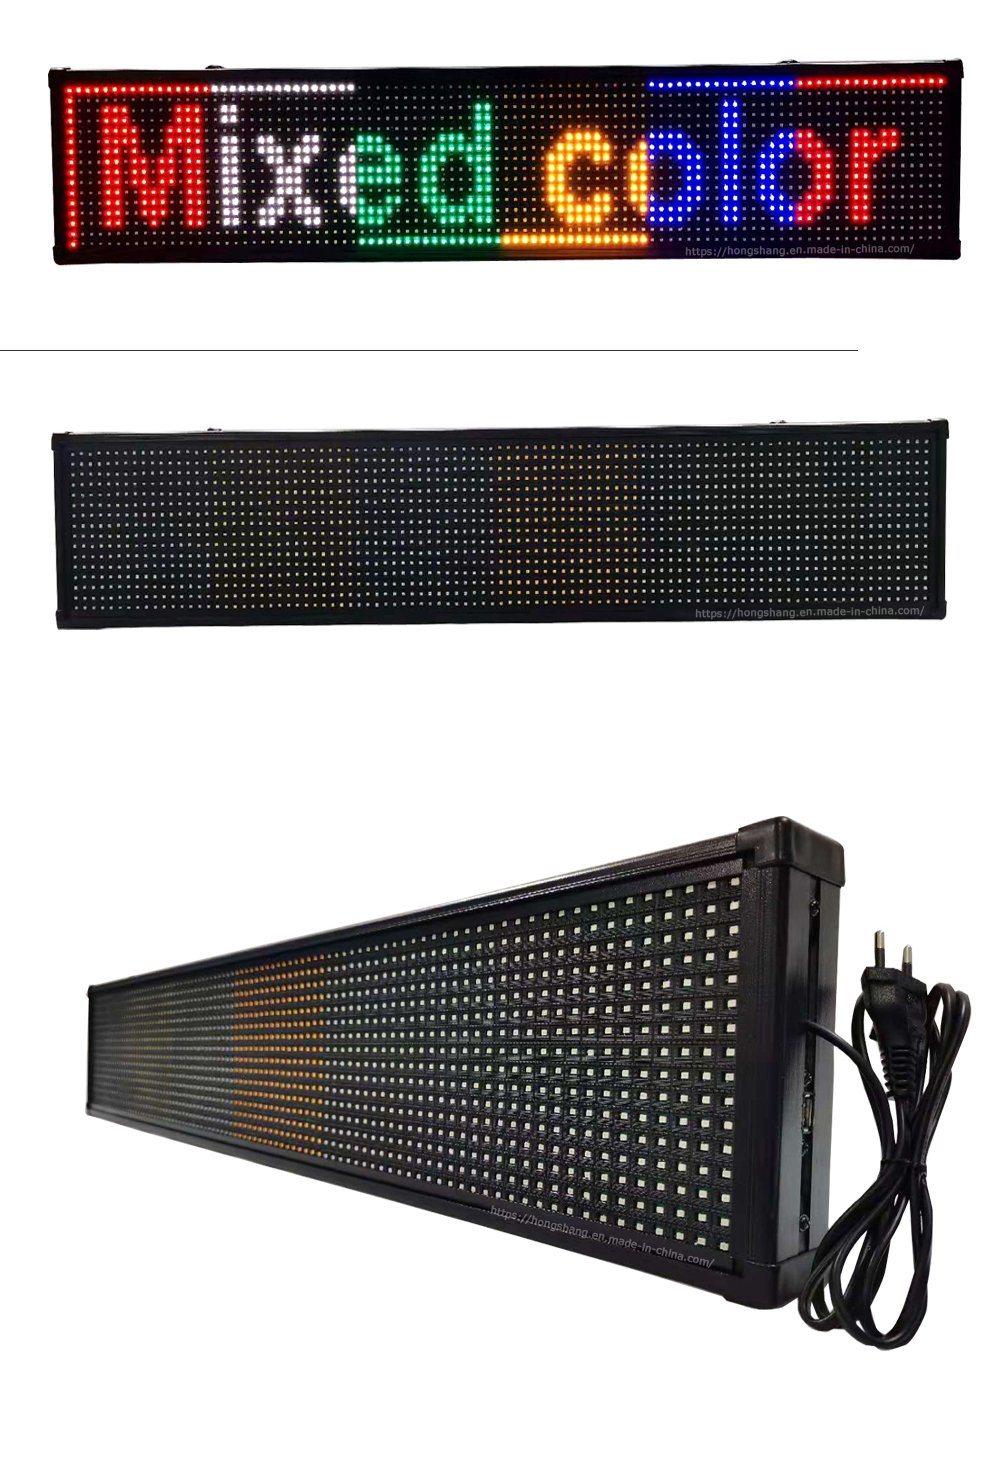 Wholesale Supermarkets Sell Products with Simple Operation of LED Screens